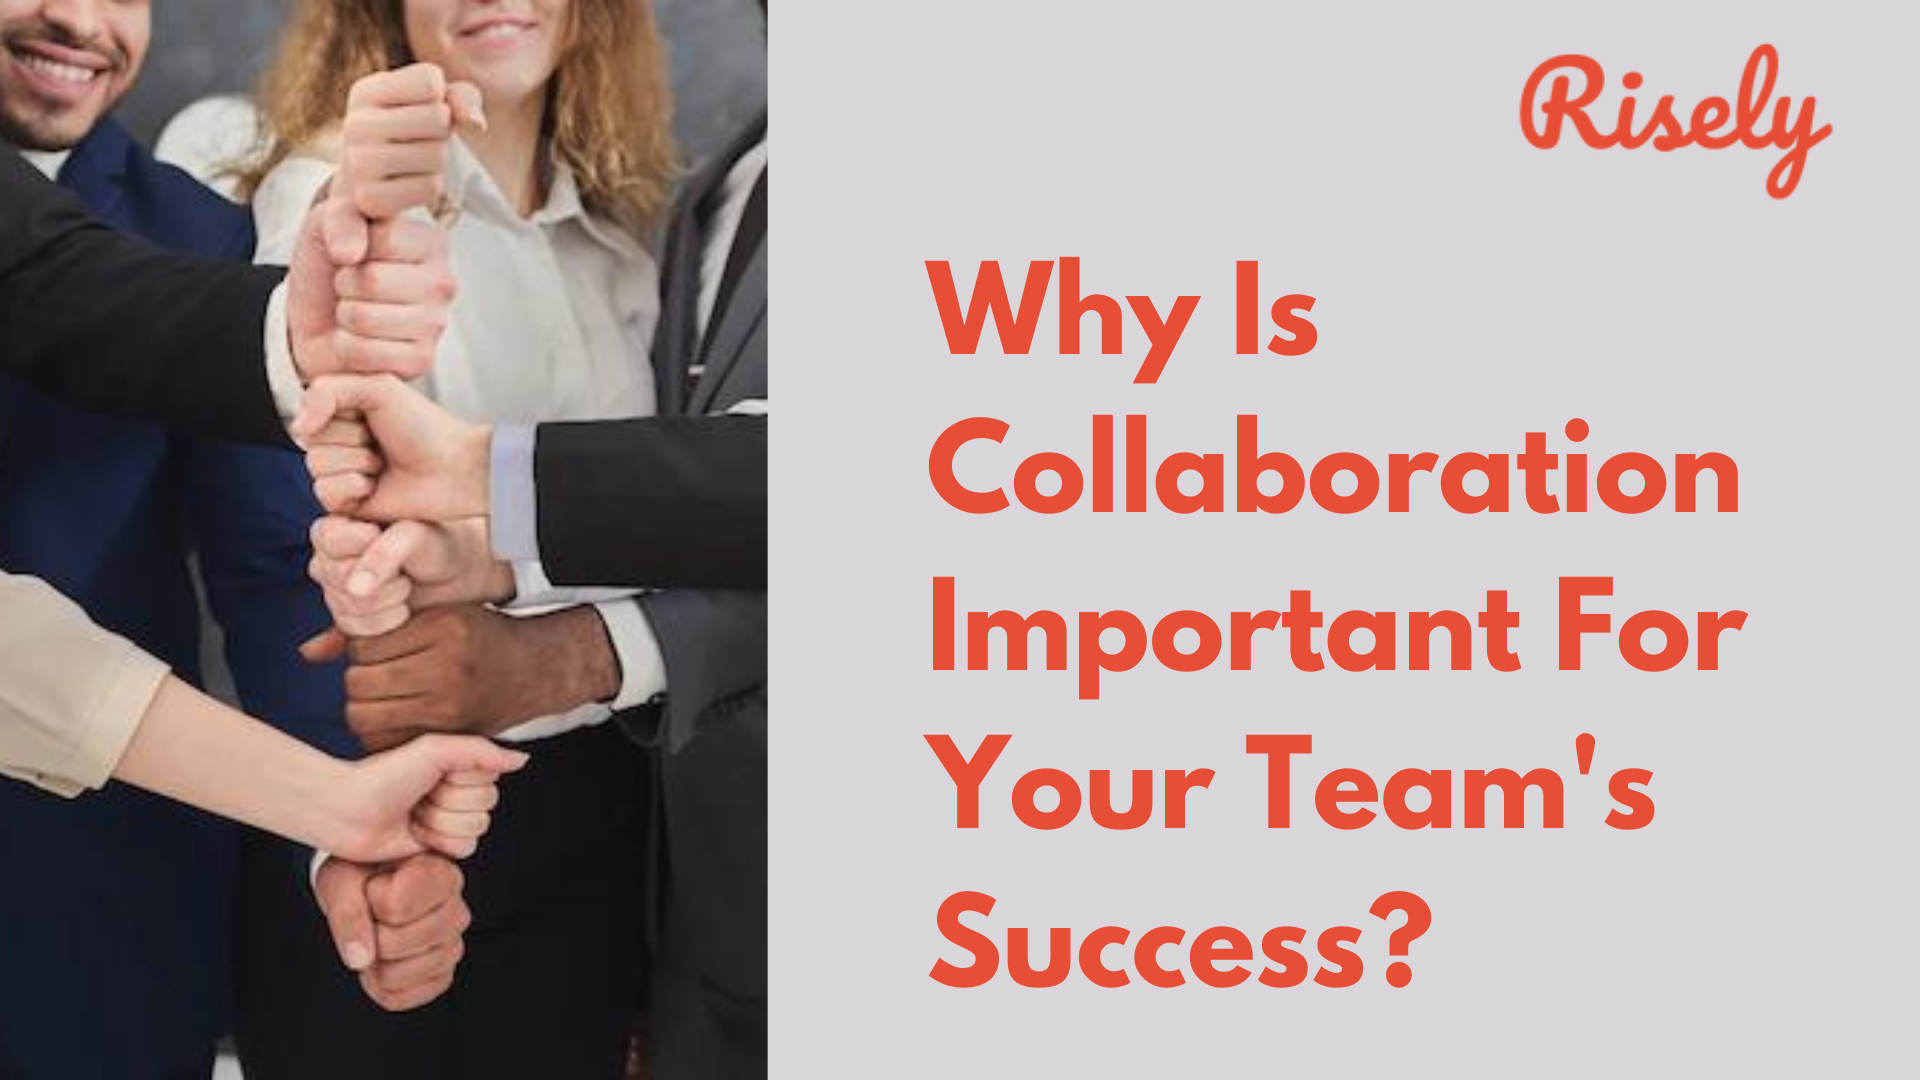 Why Is Collaboration Important For Your Team’s Success?